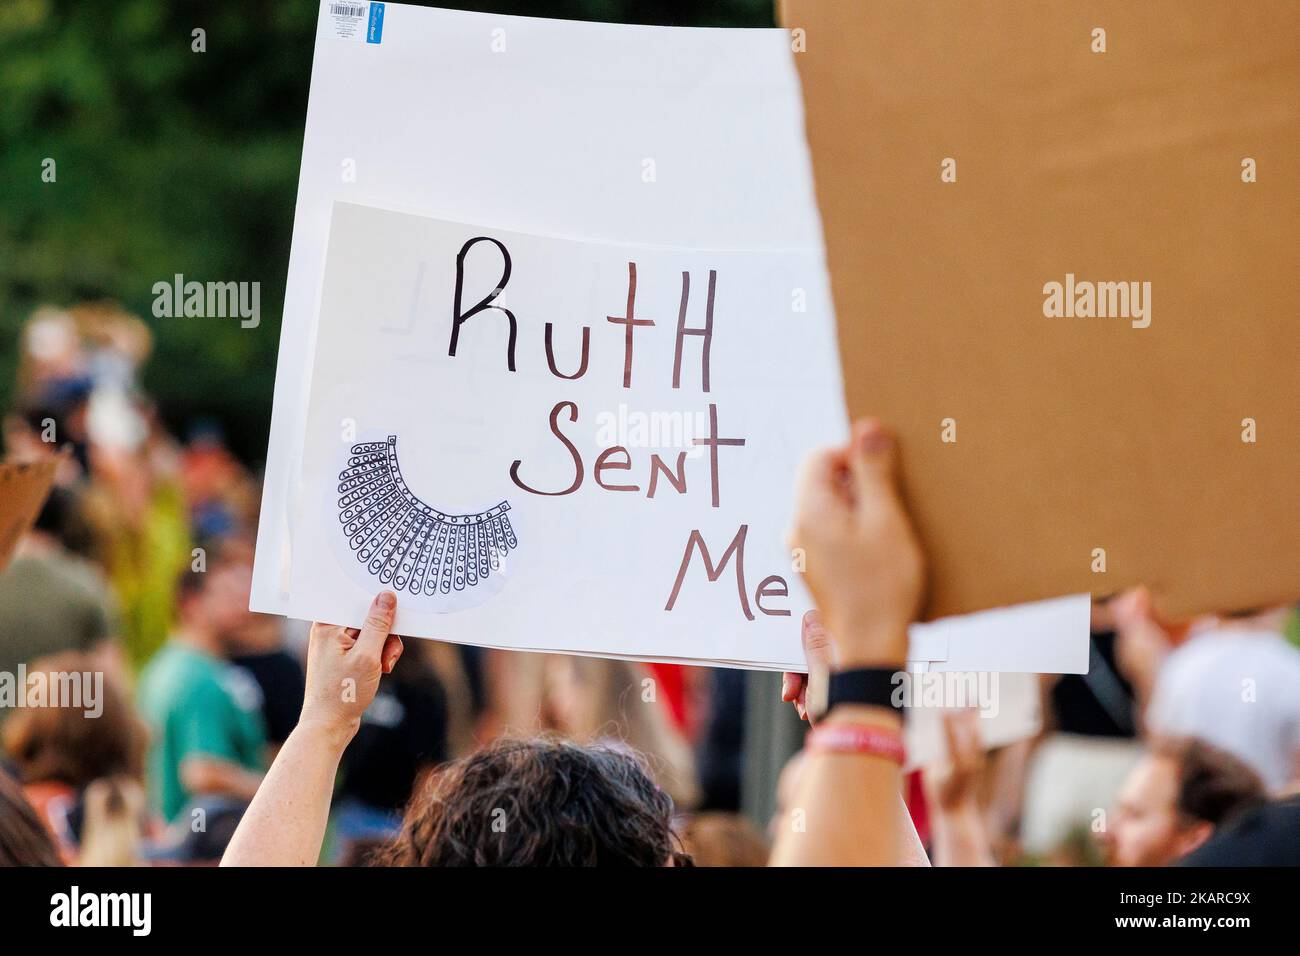 Close-up of RBG protest sign held in crowd at abortion rights rally Stock Photo